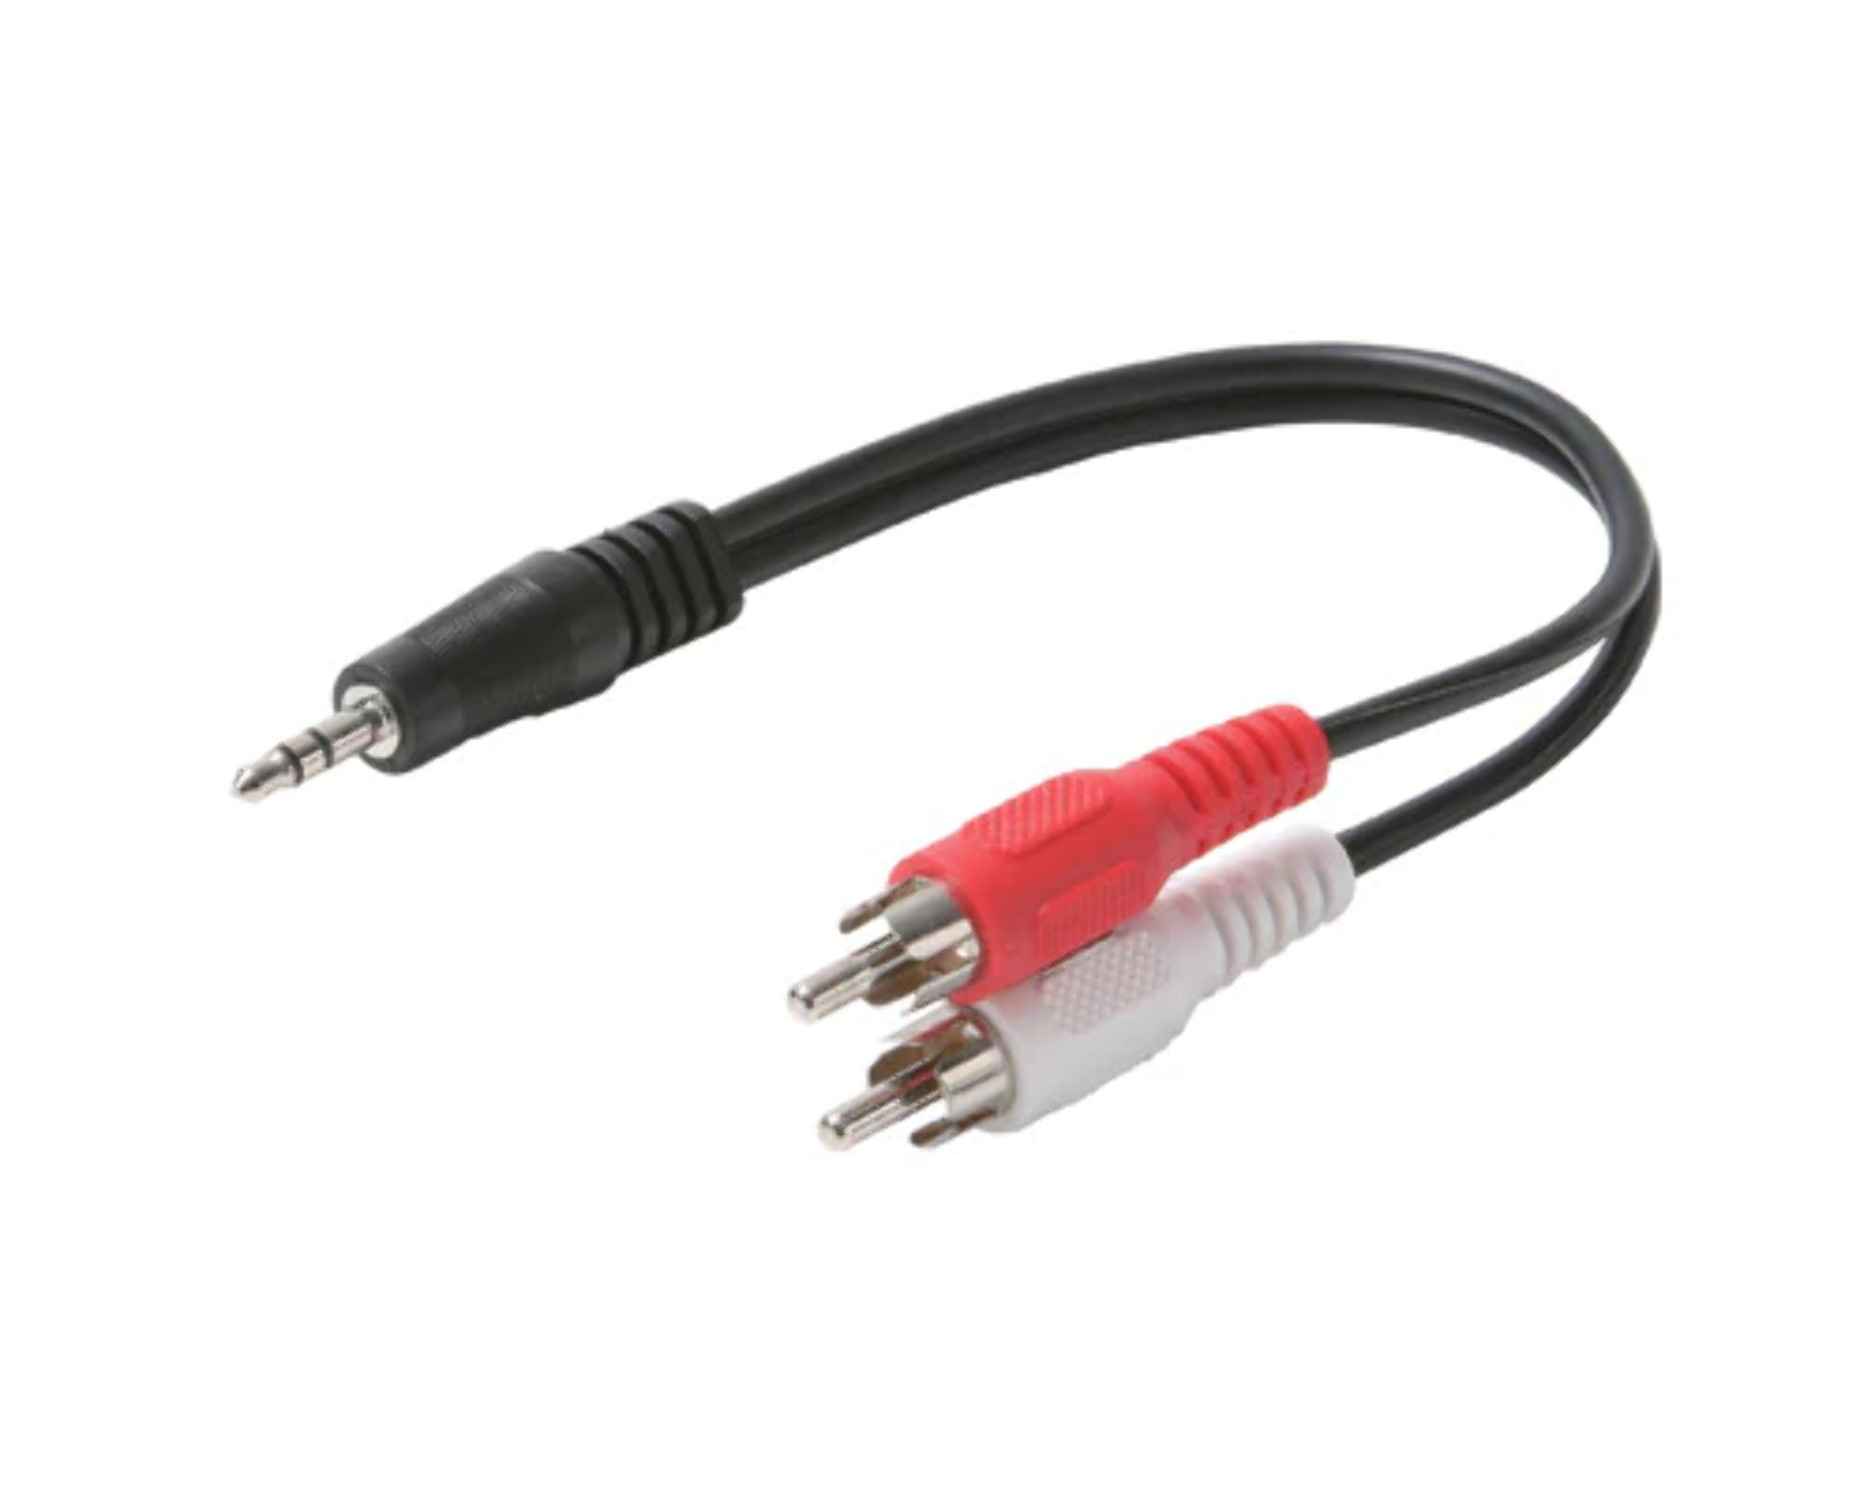 255-037 STEREN 6IN 2RCA PLUGS-I 3.5MM PLUG Y CABLE - image 2 of 2